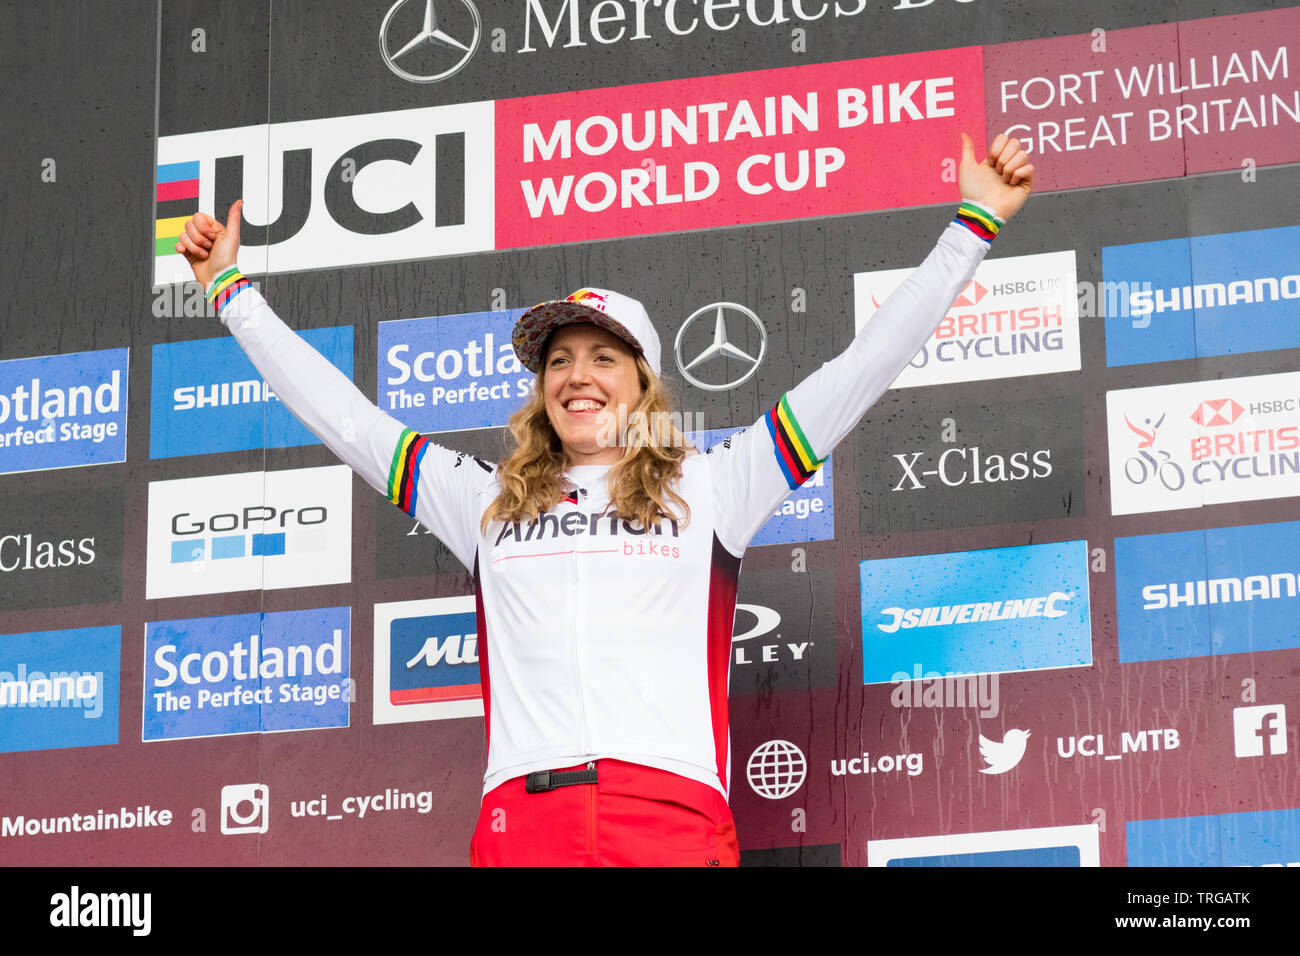 Rachel Atherton wearing the 2019 Mercedes-Benz UCI Mountain Bike World Cup  Downhill points leader jersey after winning at Fort William, Scotland, UK  Stock Photo - Alamy